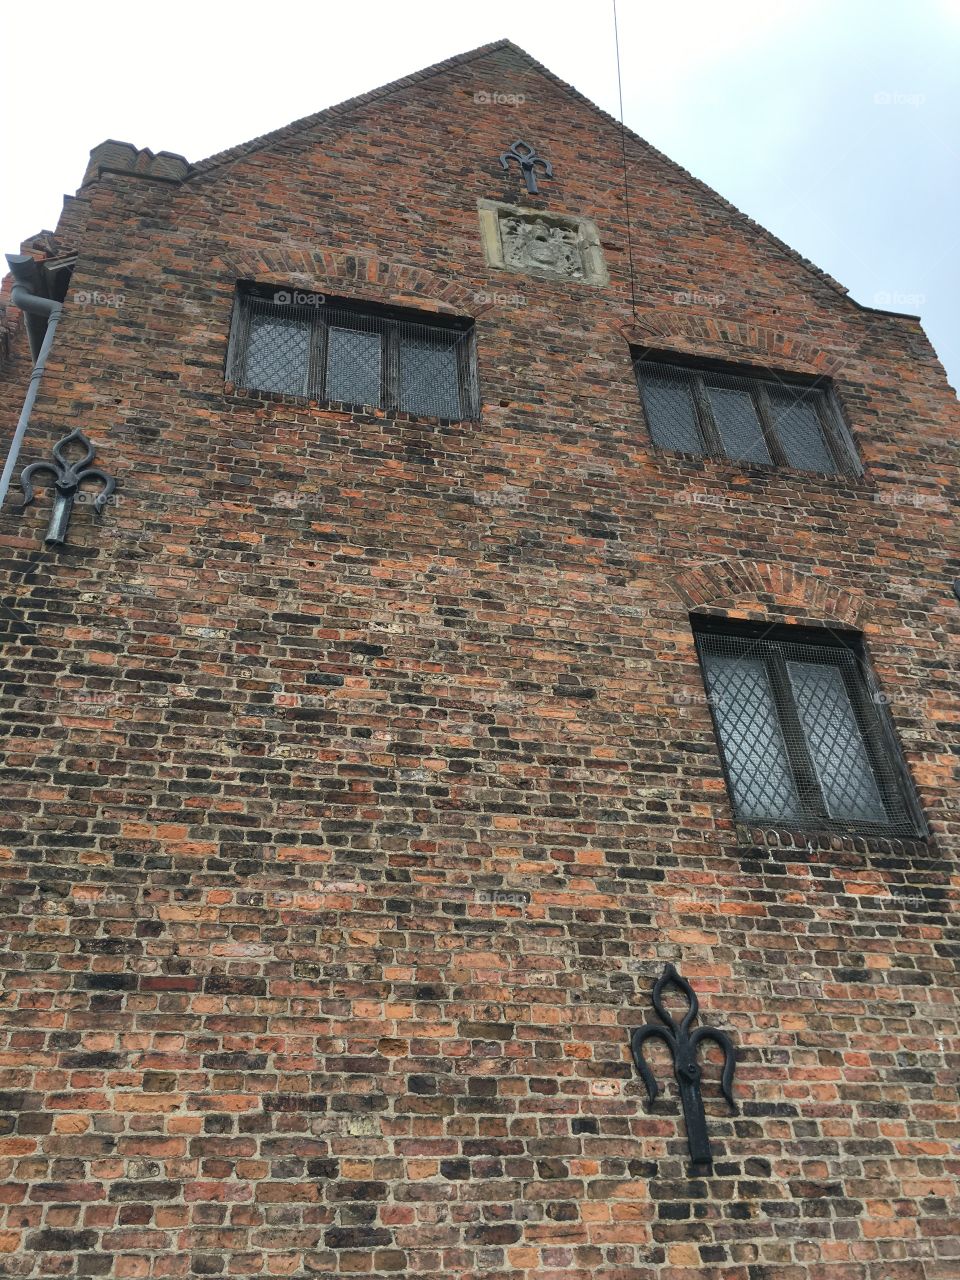 Exterior view of brickwork and windows of the mediaeval Manor House of Gainsborough Old Hall in England